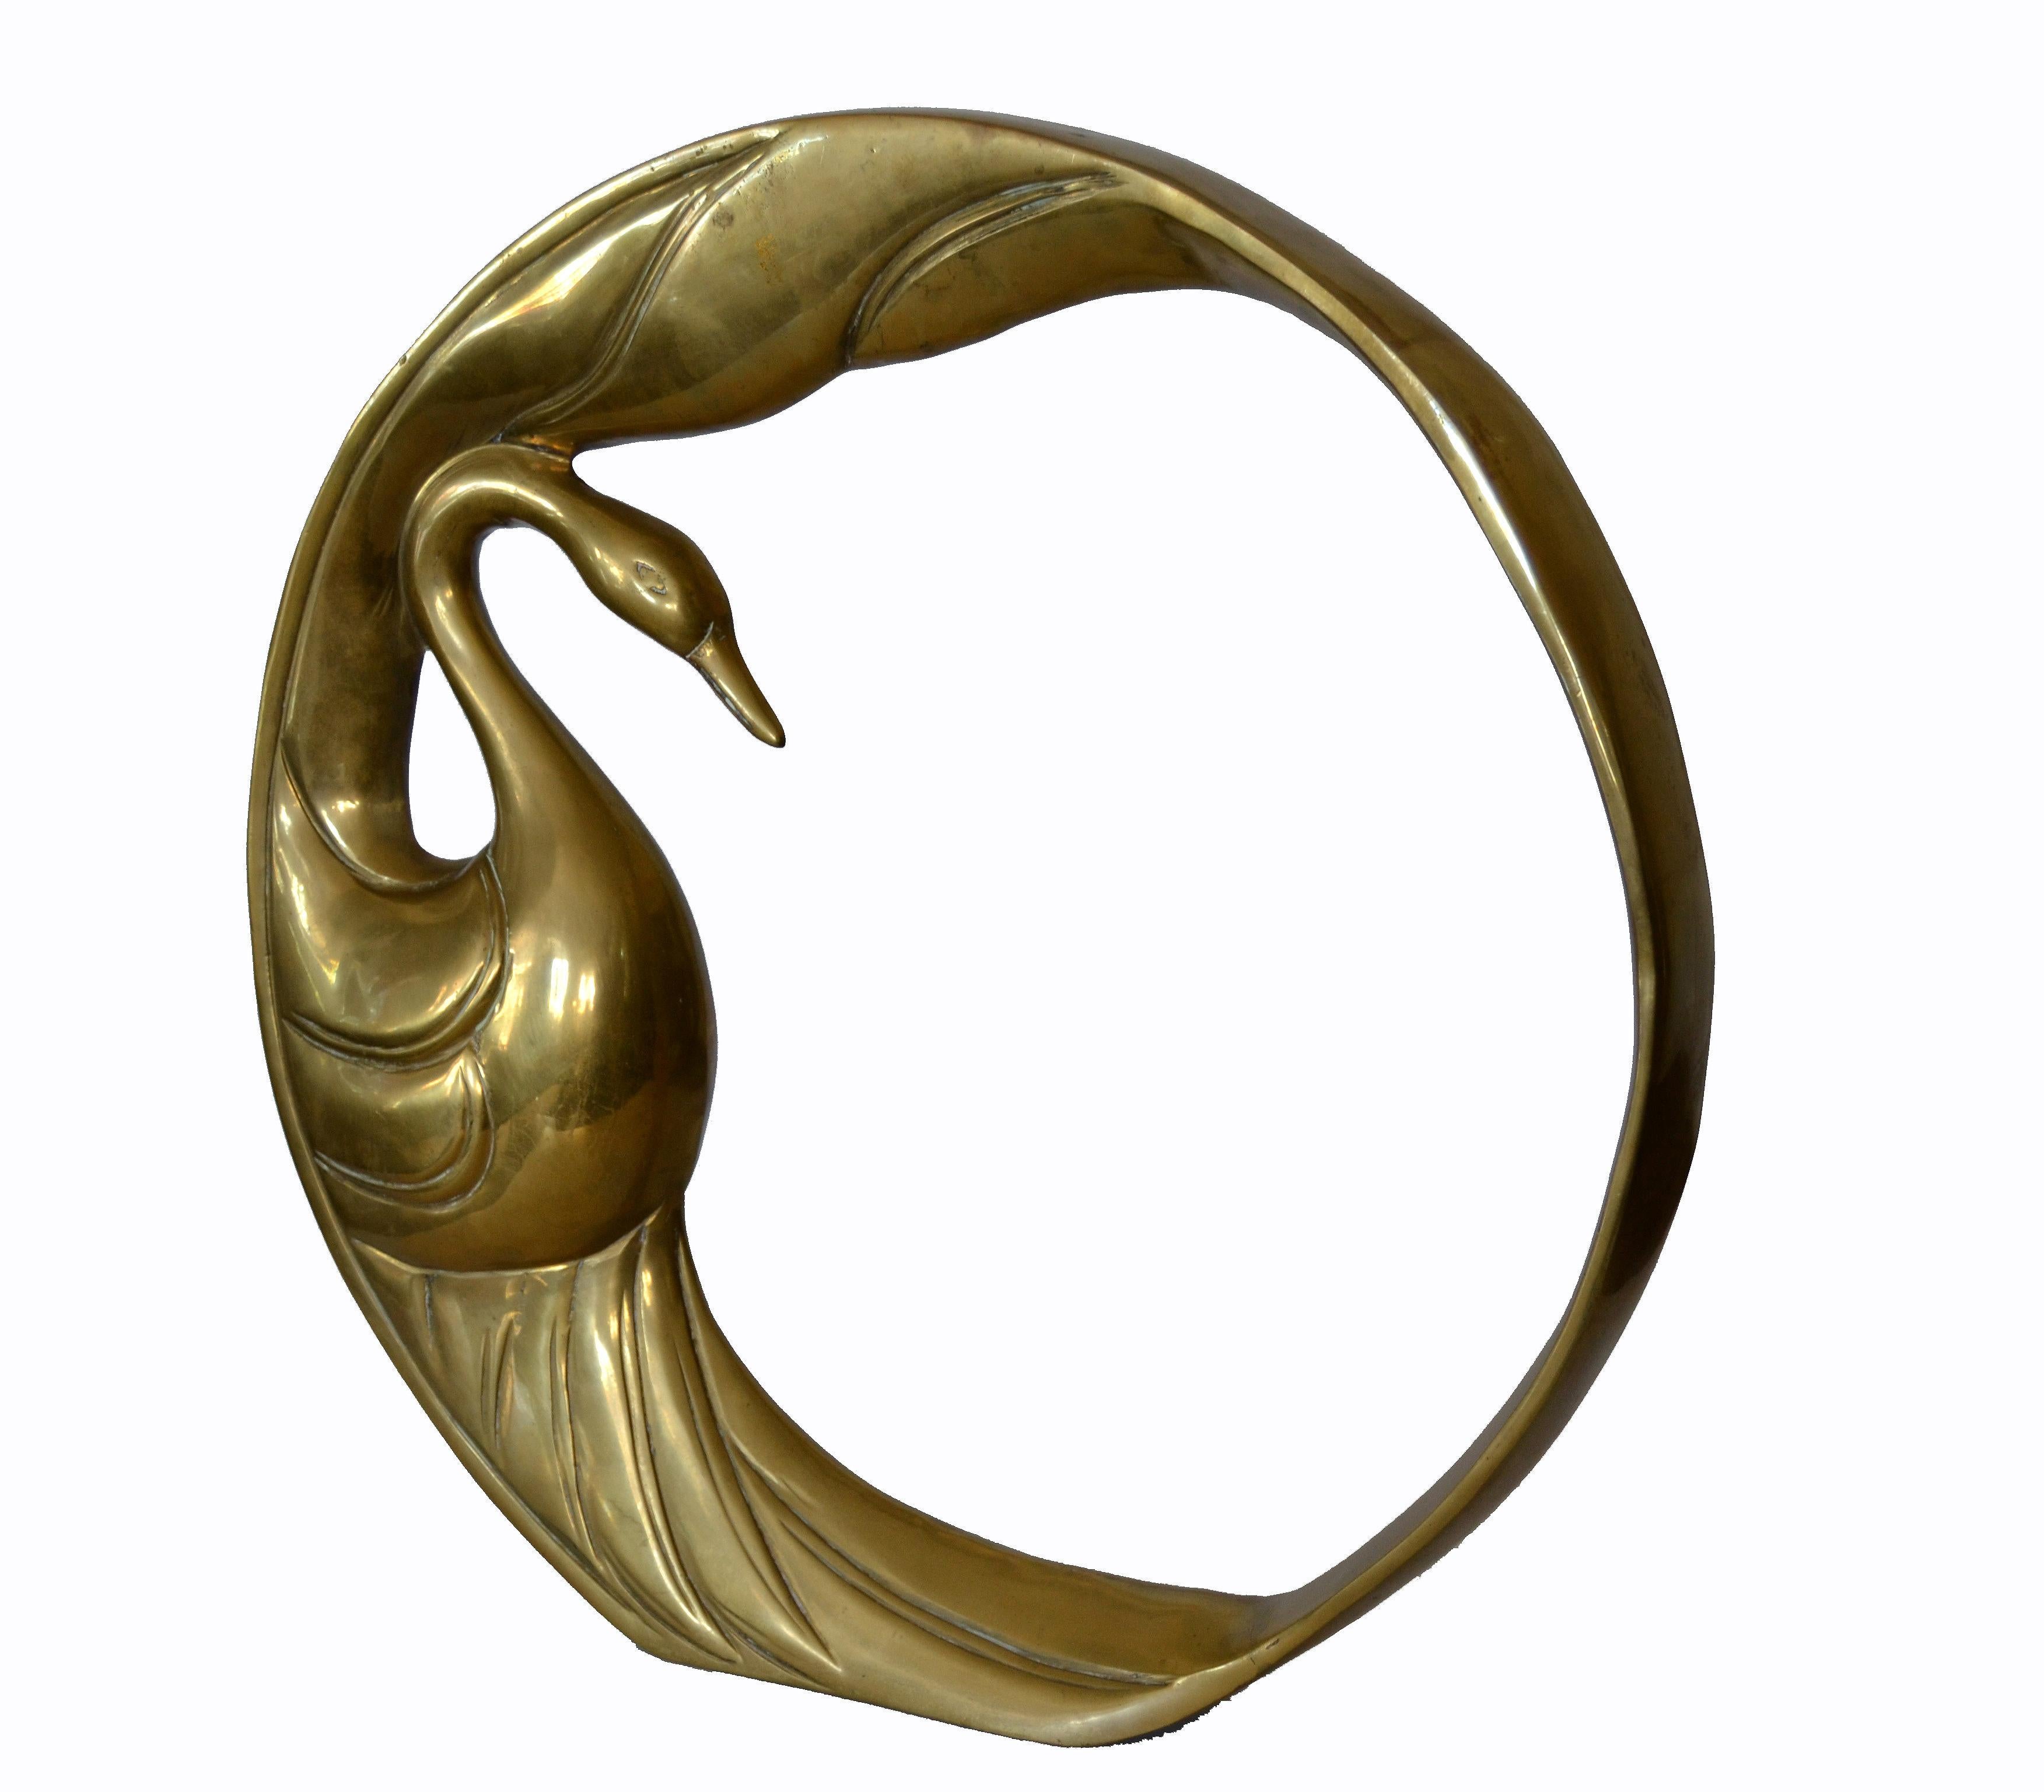 We offer a heavy Mid-Century Modern golden bronze swan ring table sculpture by Dolbi Cashier, 1984.
The ring is an ancient symbol, so perfect and simple. It has no beginning and has no end.
It is round like the sun, like the moon, like the eye,